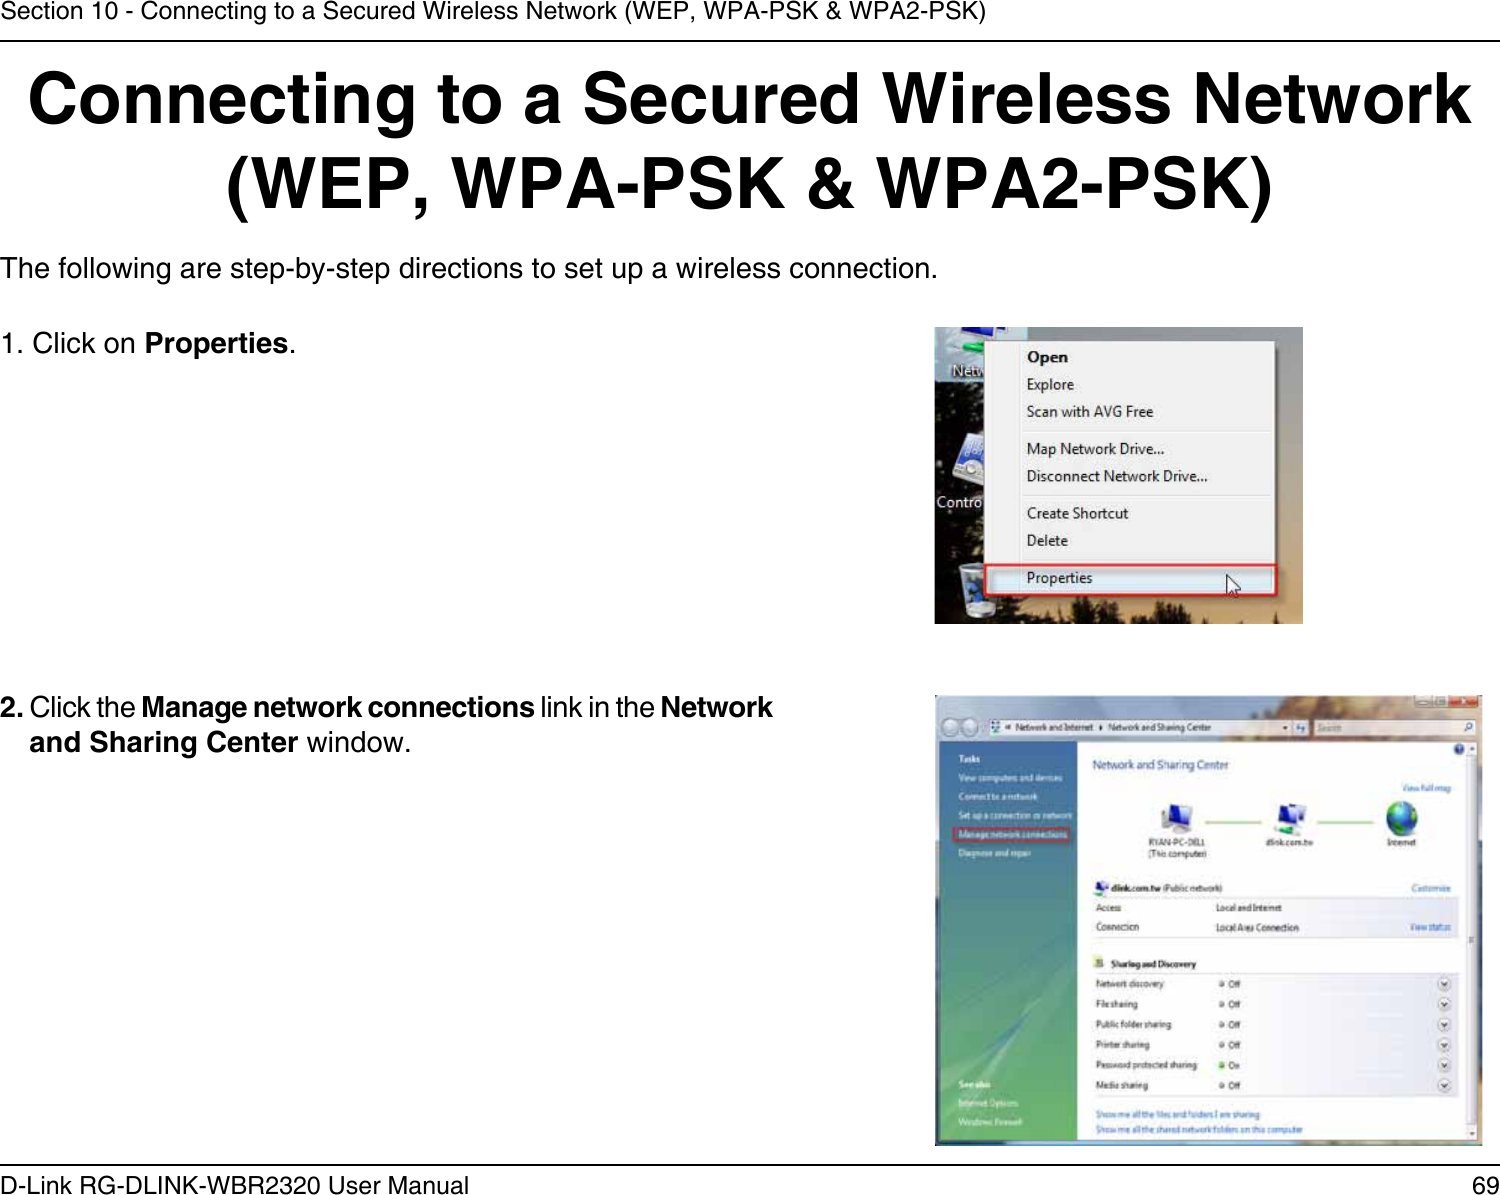 69D-Link RG-DLINK-WBR2320 User ManualSection 10 - Connecting to a Secured Wireless Network (WEP, WPA-PSK &amp; WPA2-PSK)Connecting to a Secured Wireless Network (WEP, WPA-PSK &amp; WPA2-PSK)The following are step-by-step directions to set up a wireless connection.2. Click the Manage network connections link in the Network and Sharing Center window. 1. Click on Properties.     